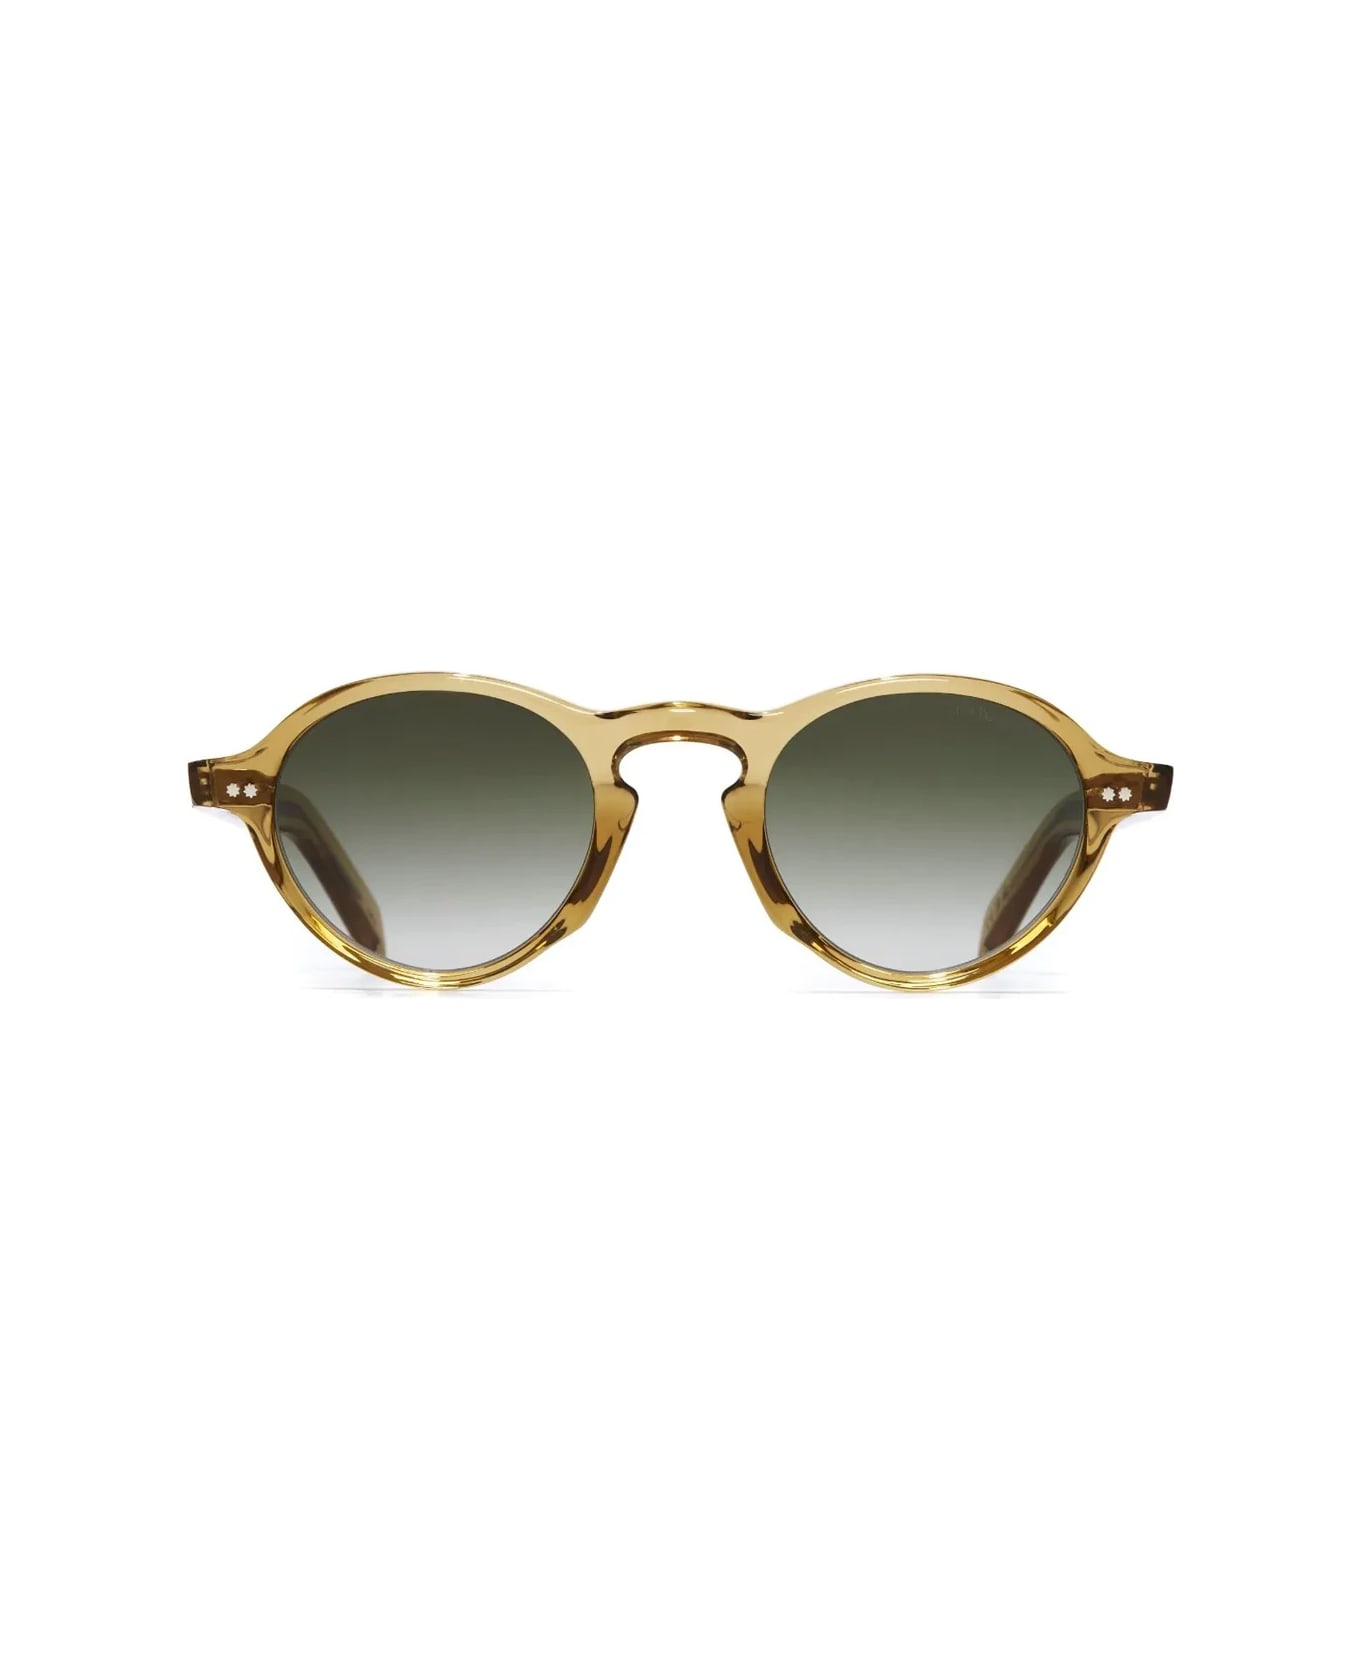 Cutler and Gross Gr08 04 Crystal Tobacco Sunglasses - Verde